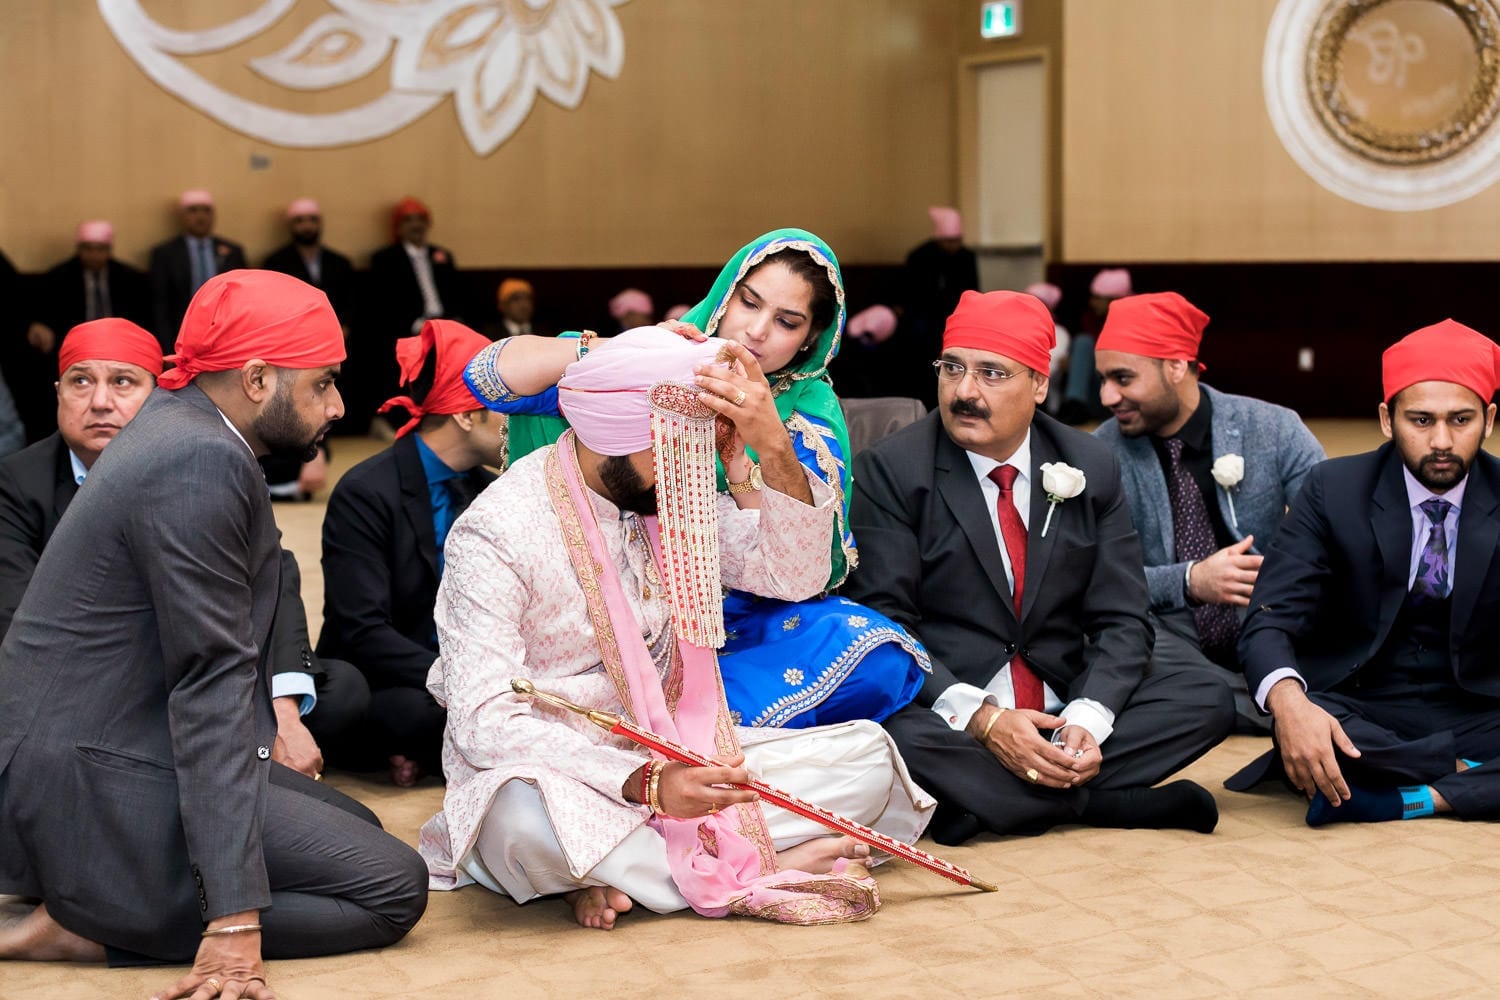 Indian wedding at the temple | Indian wedding photography Vancouver